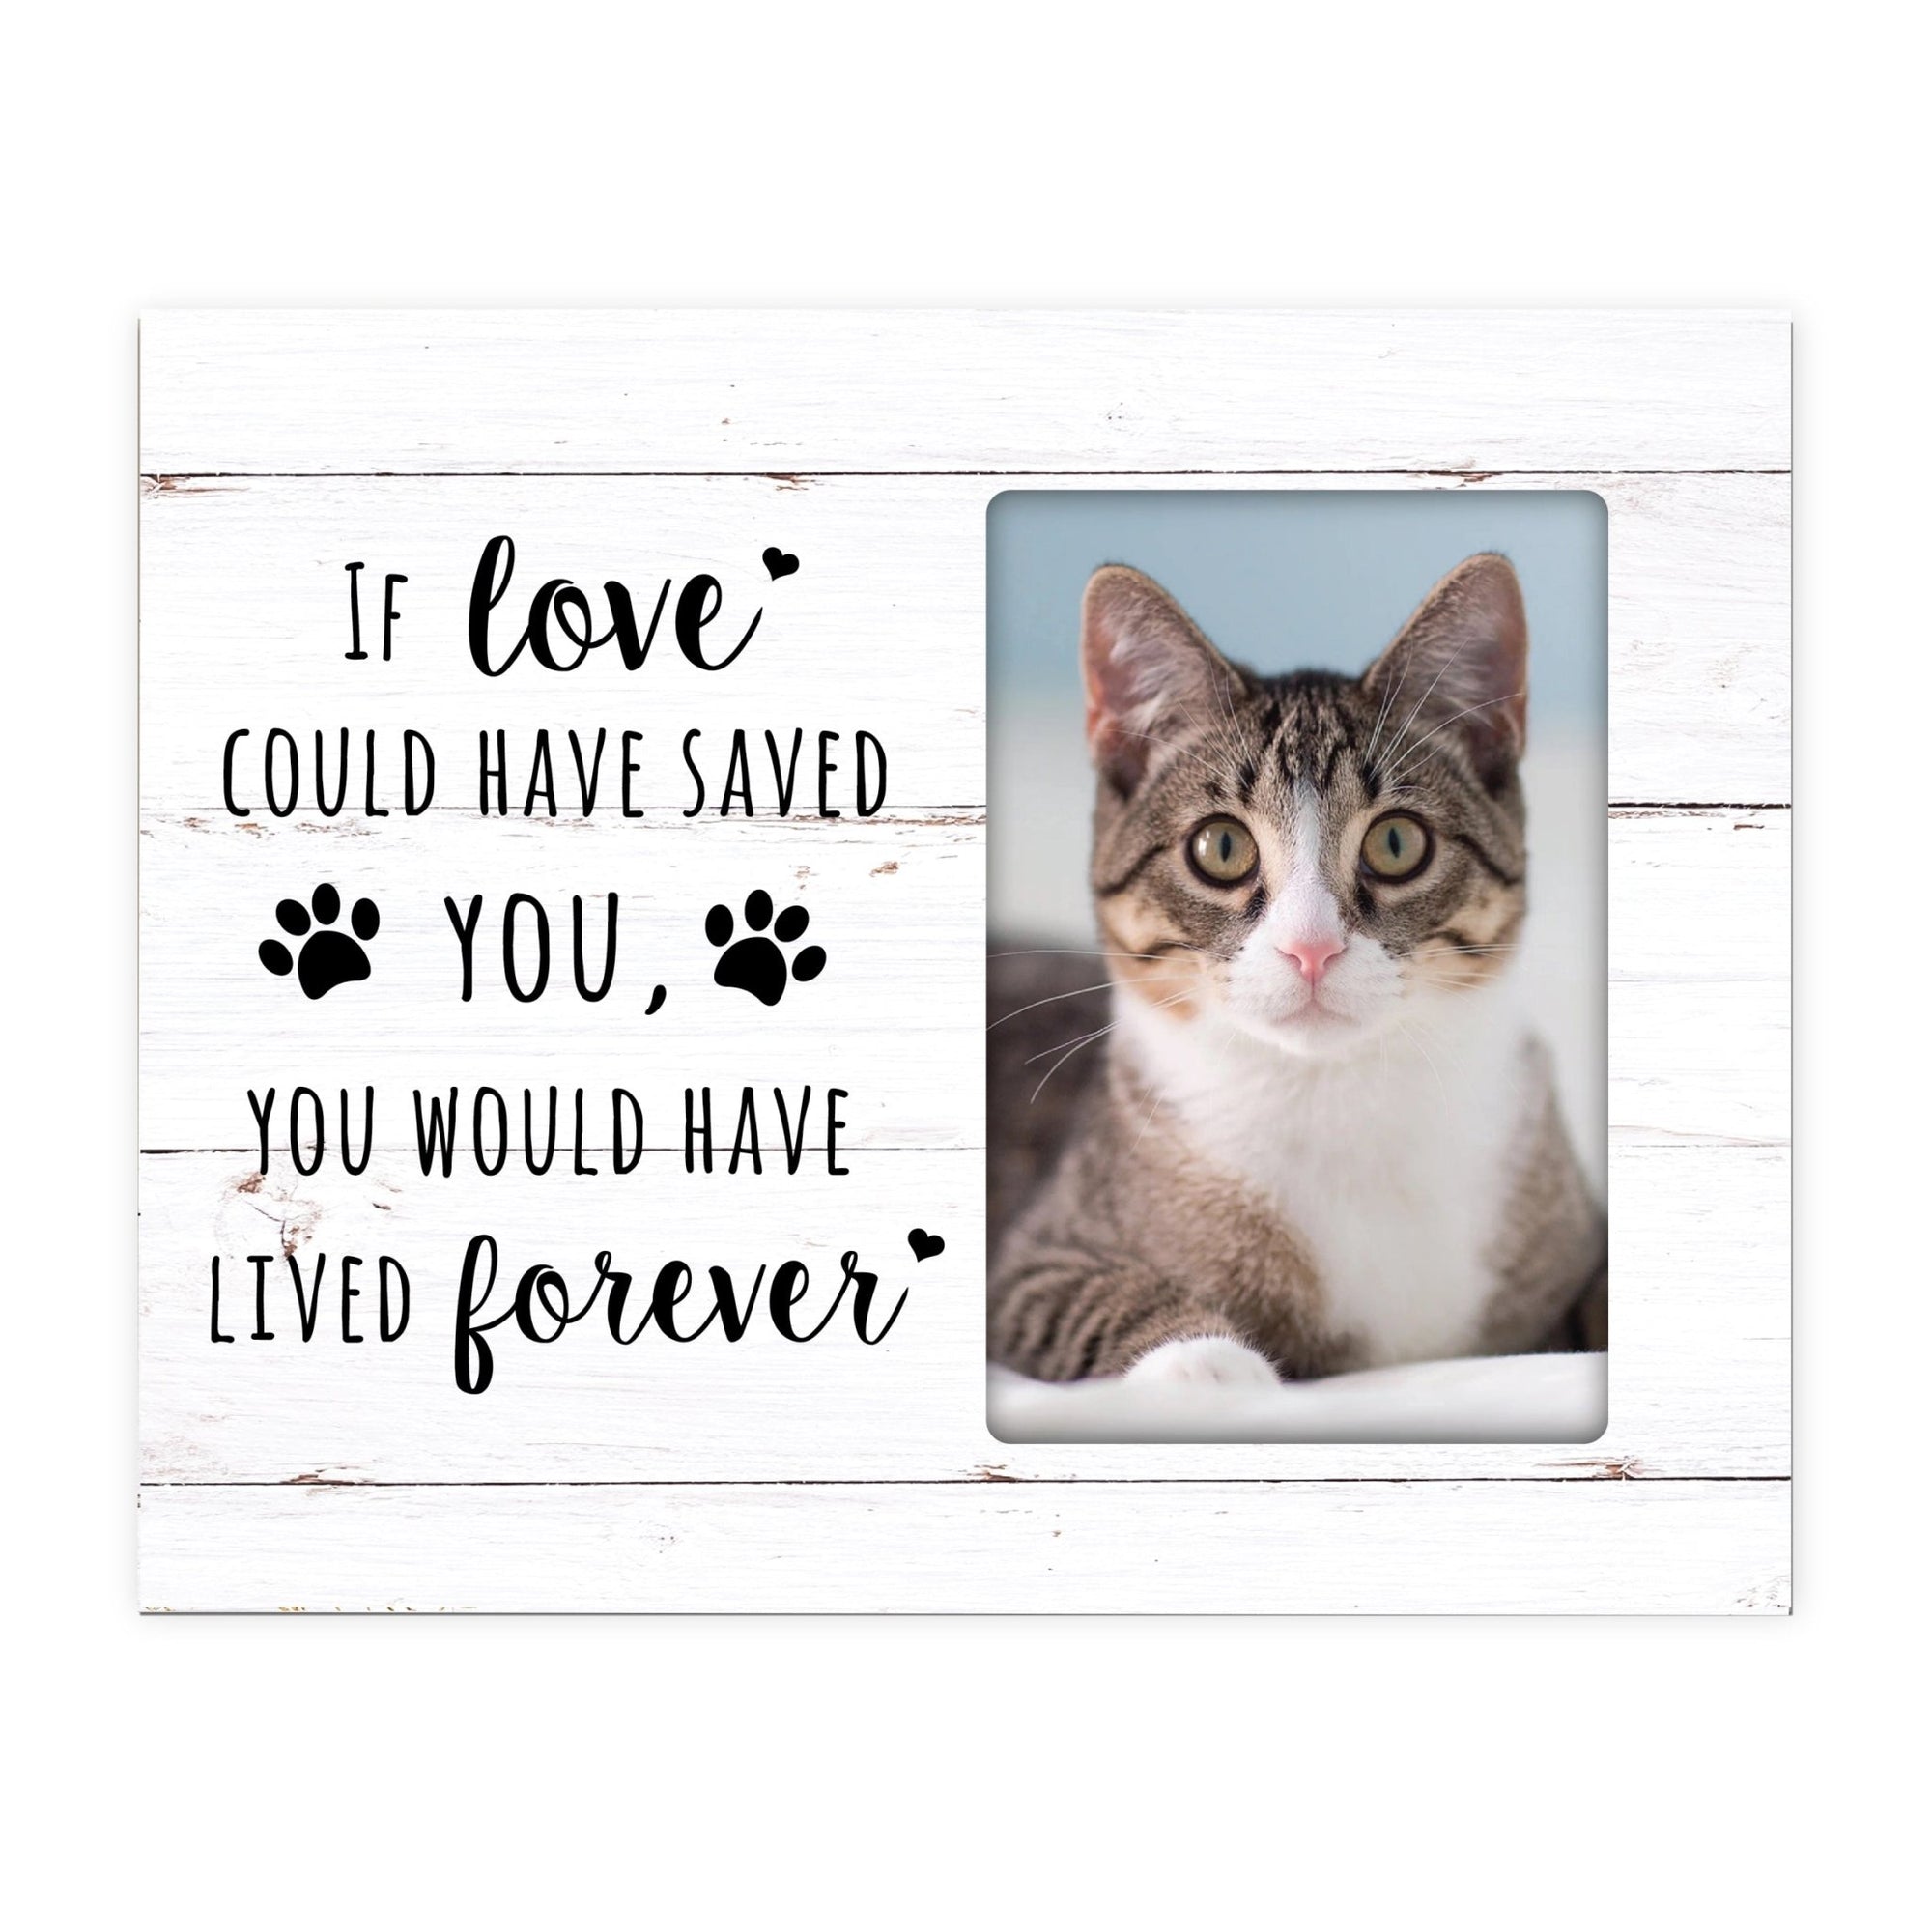 Rustic-Inspired Wooden Pet Memorial Frames That Holds A 4x6in Photo - If Love Could Have Saved You - LifeSong Milestones